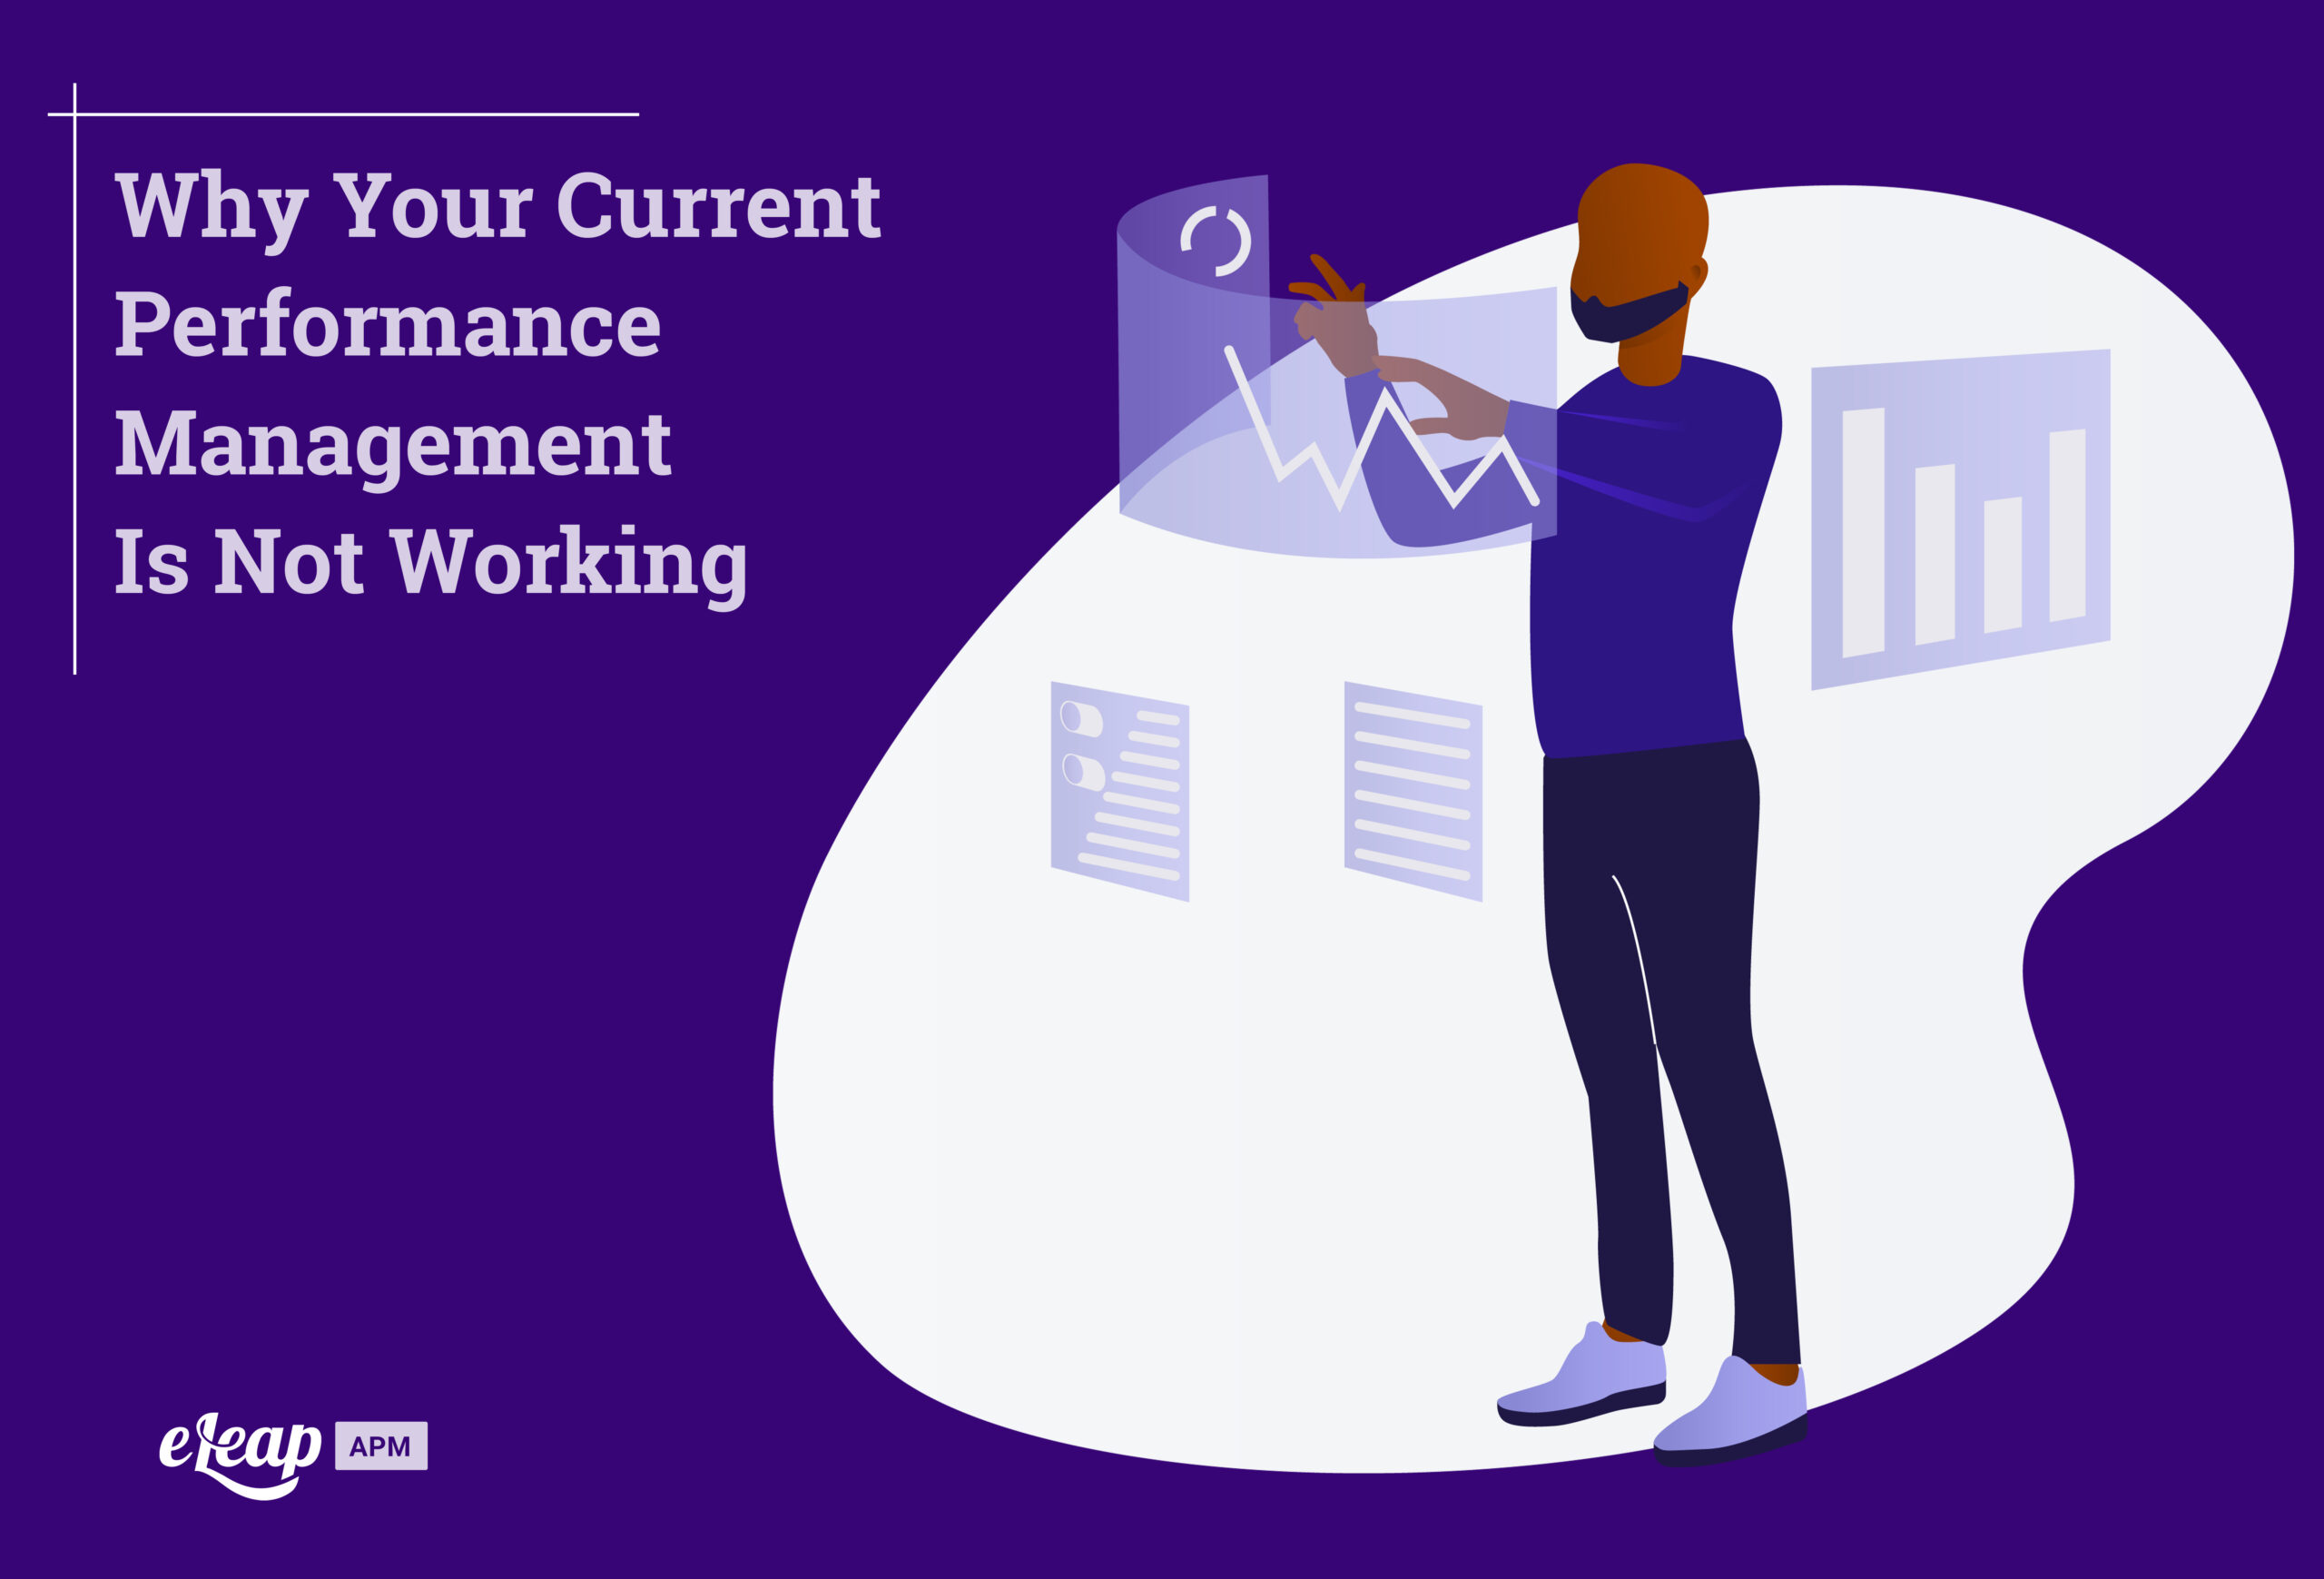 Why Your Current Performance Management Is Not Working